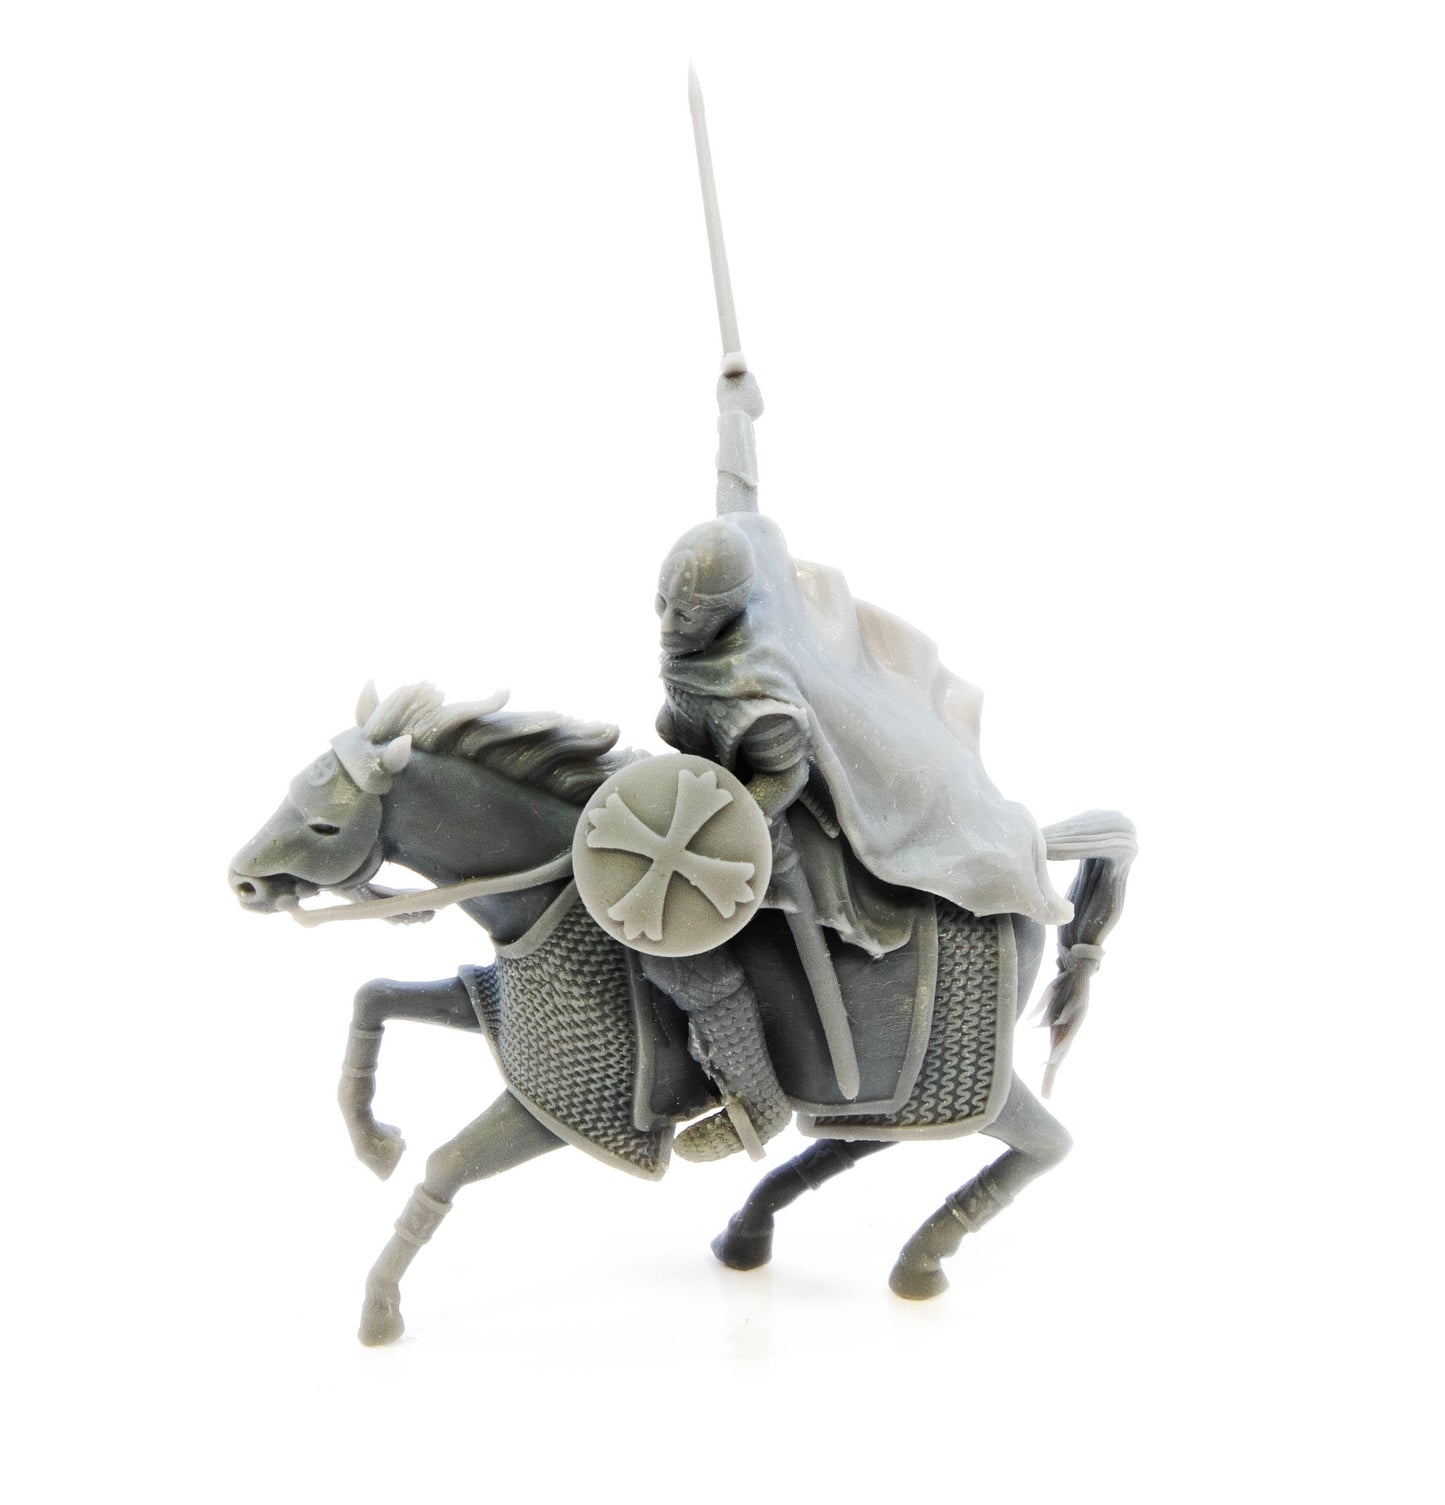 Medieval Lord of Novgorod - mounted